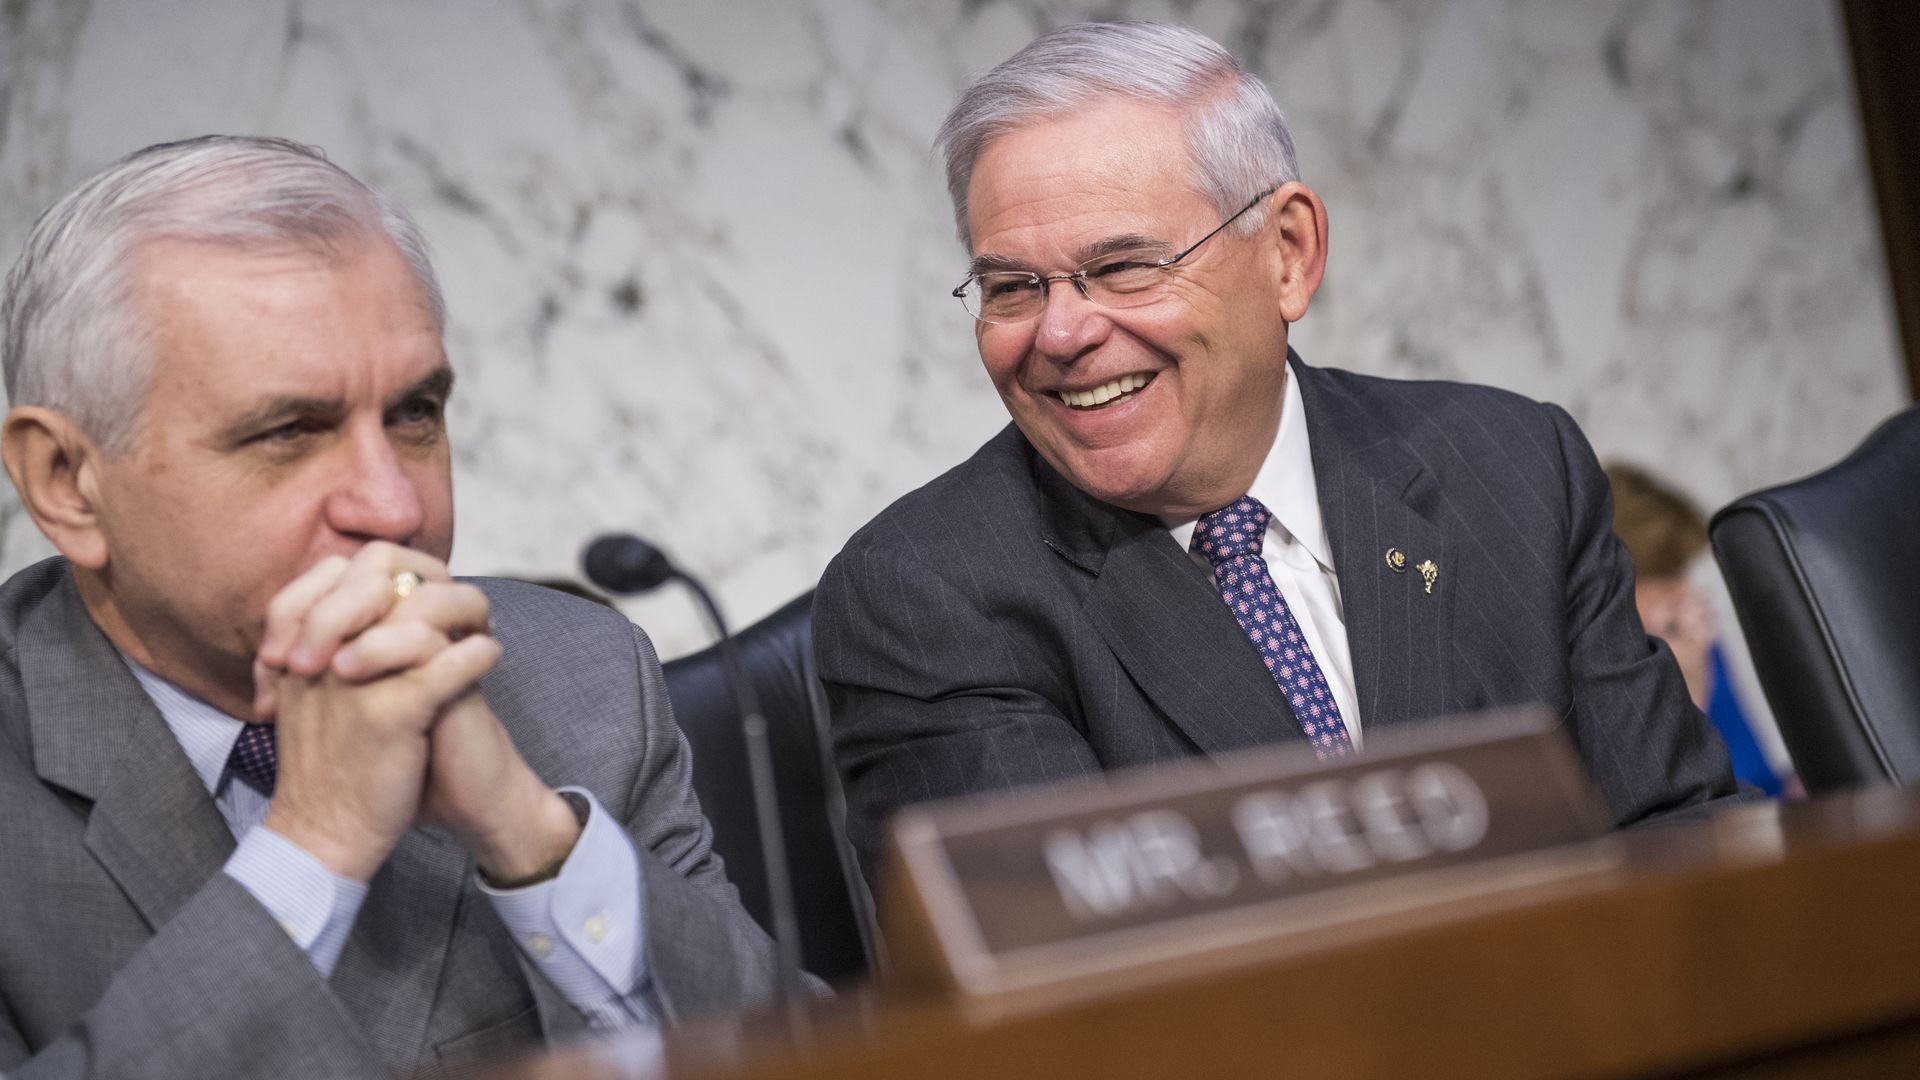 Sens. Bob Menendez are seen during a joint congressional hearing.